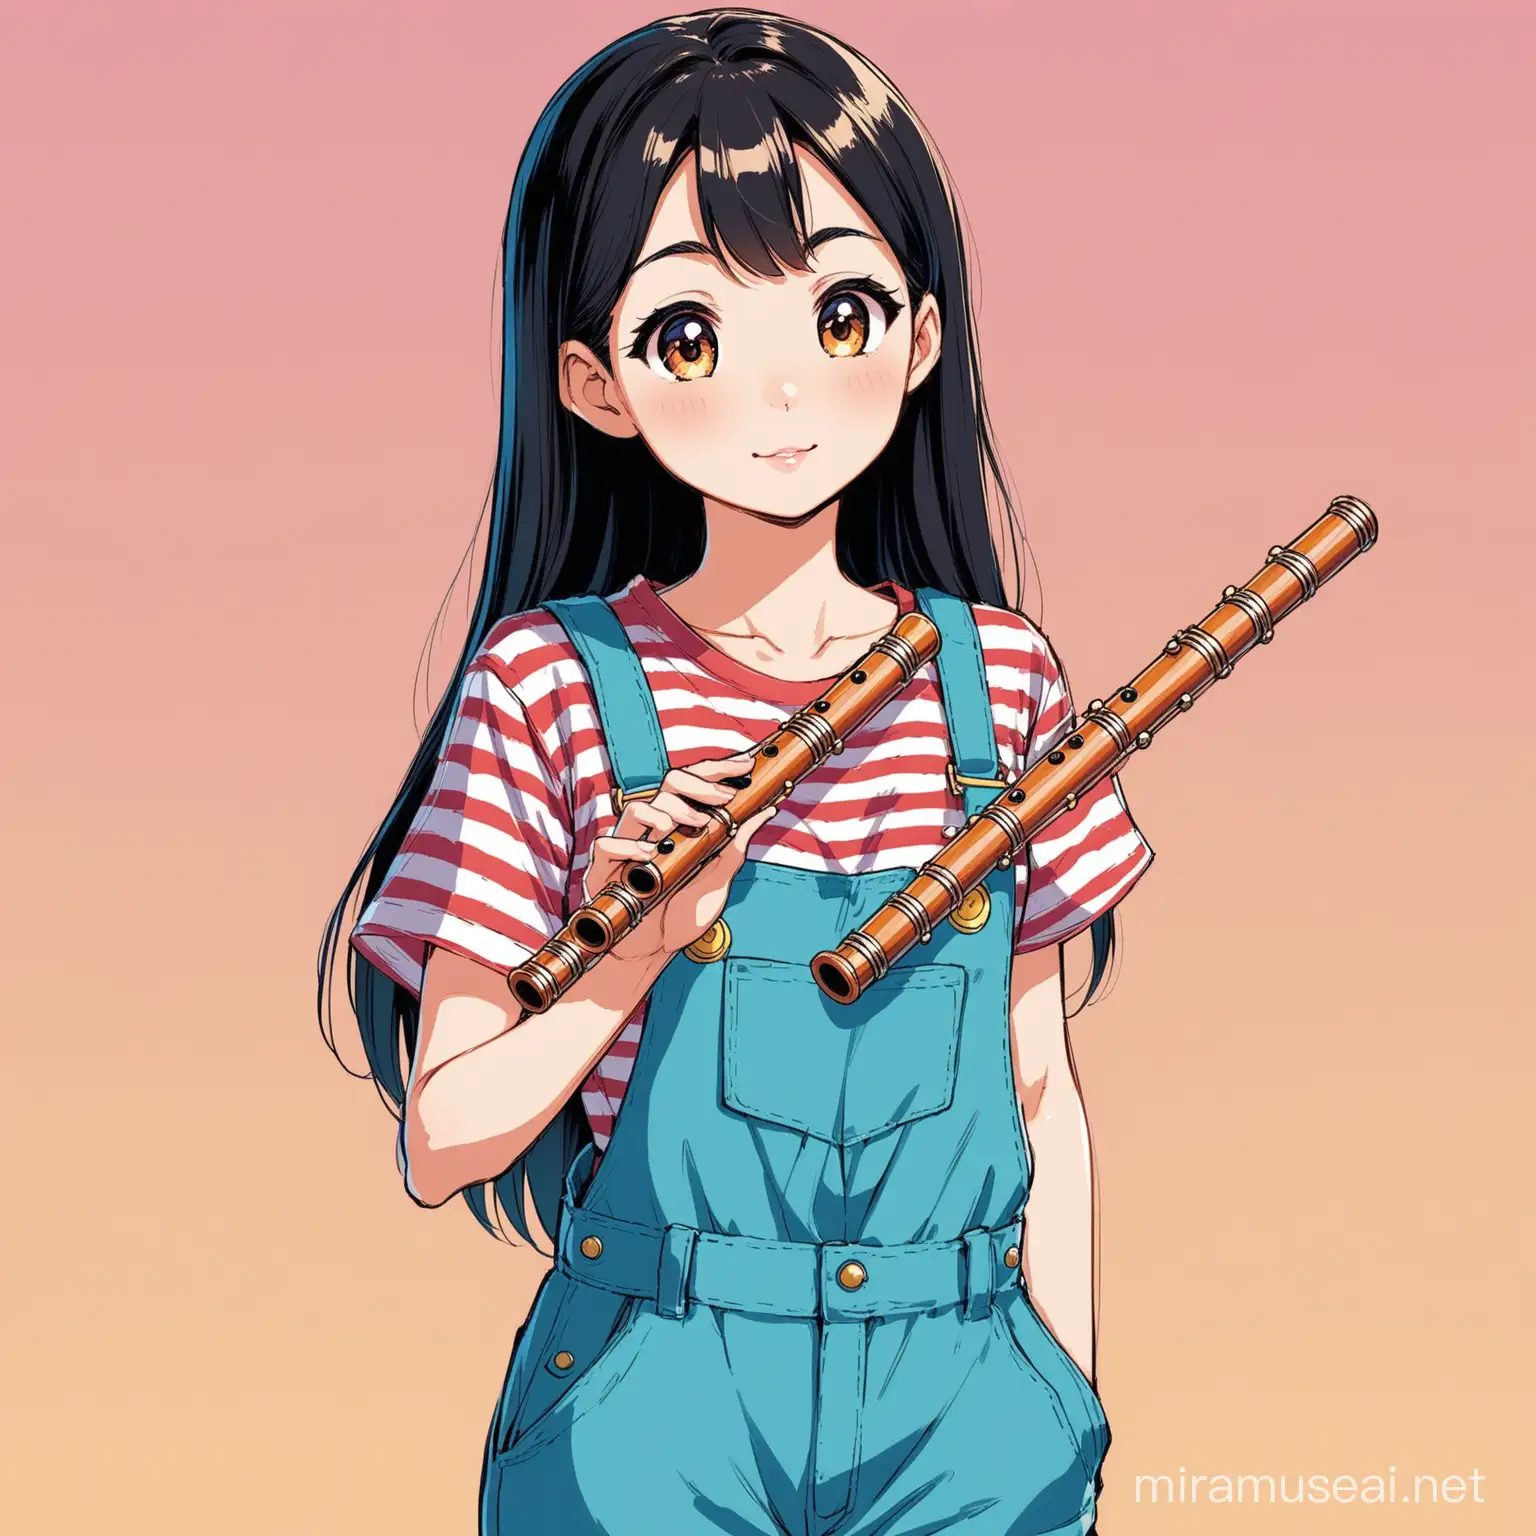 disney style japanese teenager,wearing overals,stripped shirt, holding dizi flute,